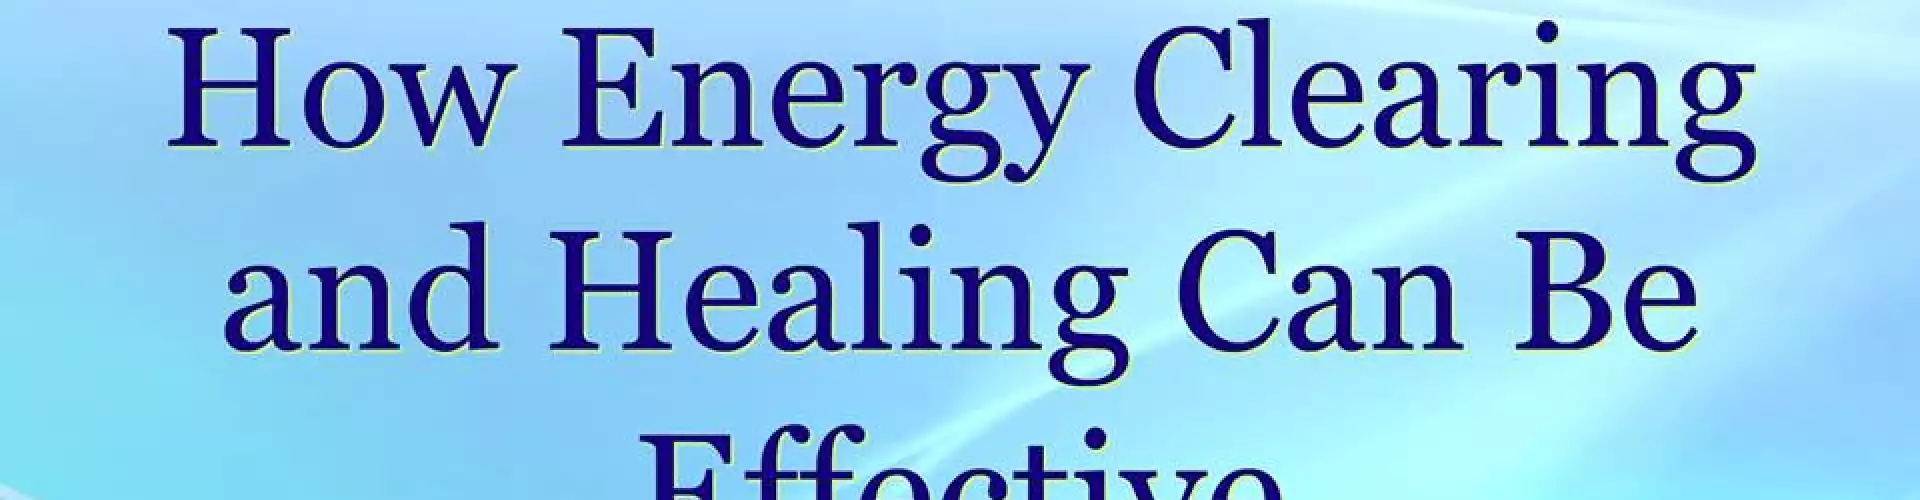 How Energy Clearing and Healing Can Be Effective